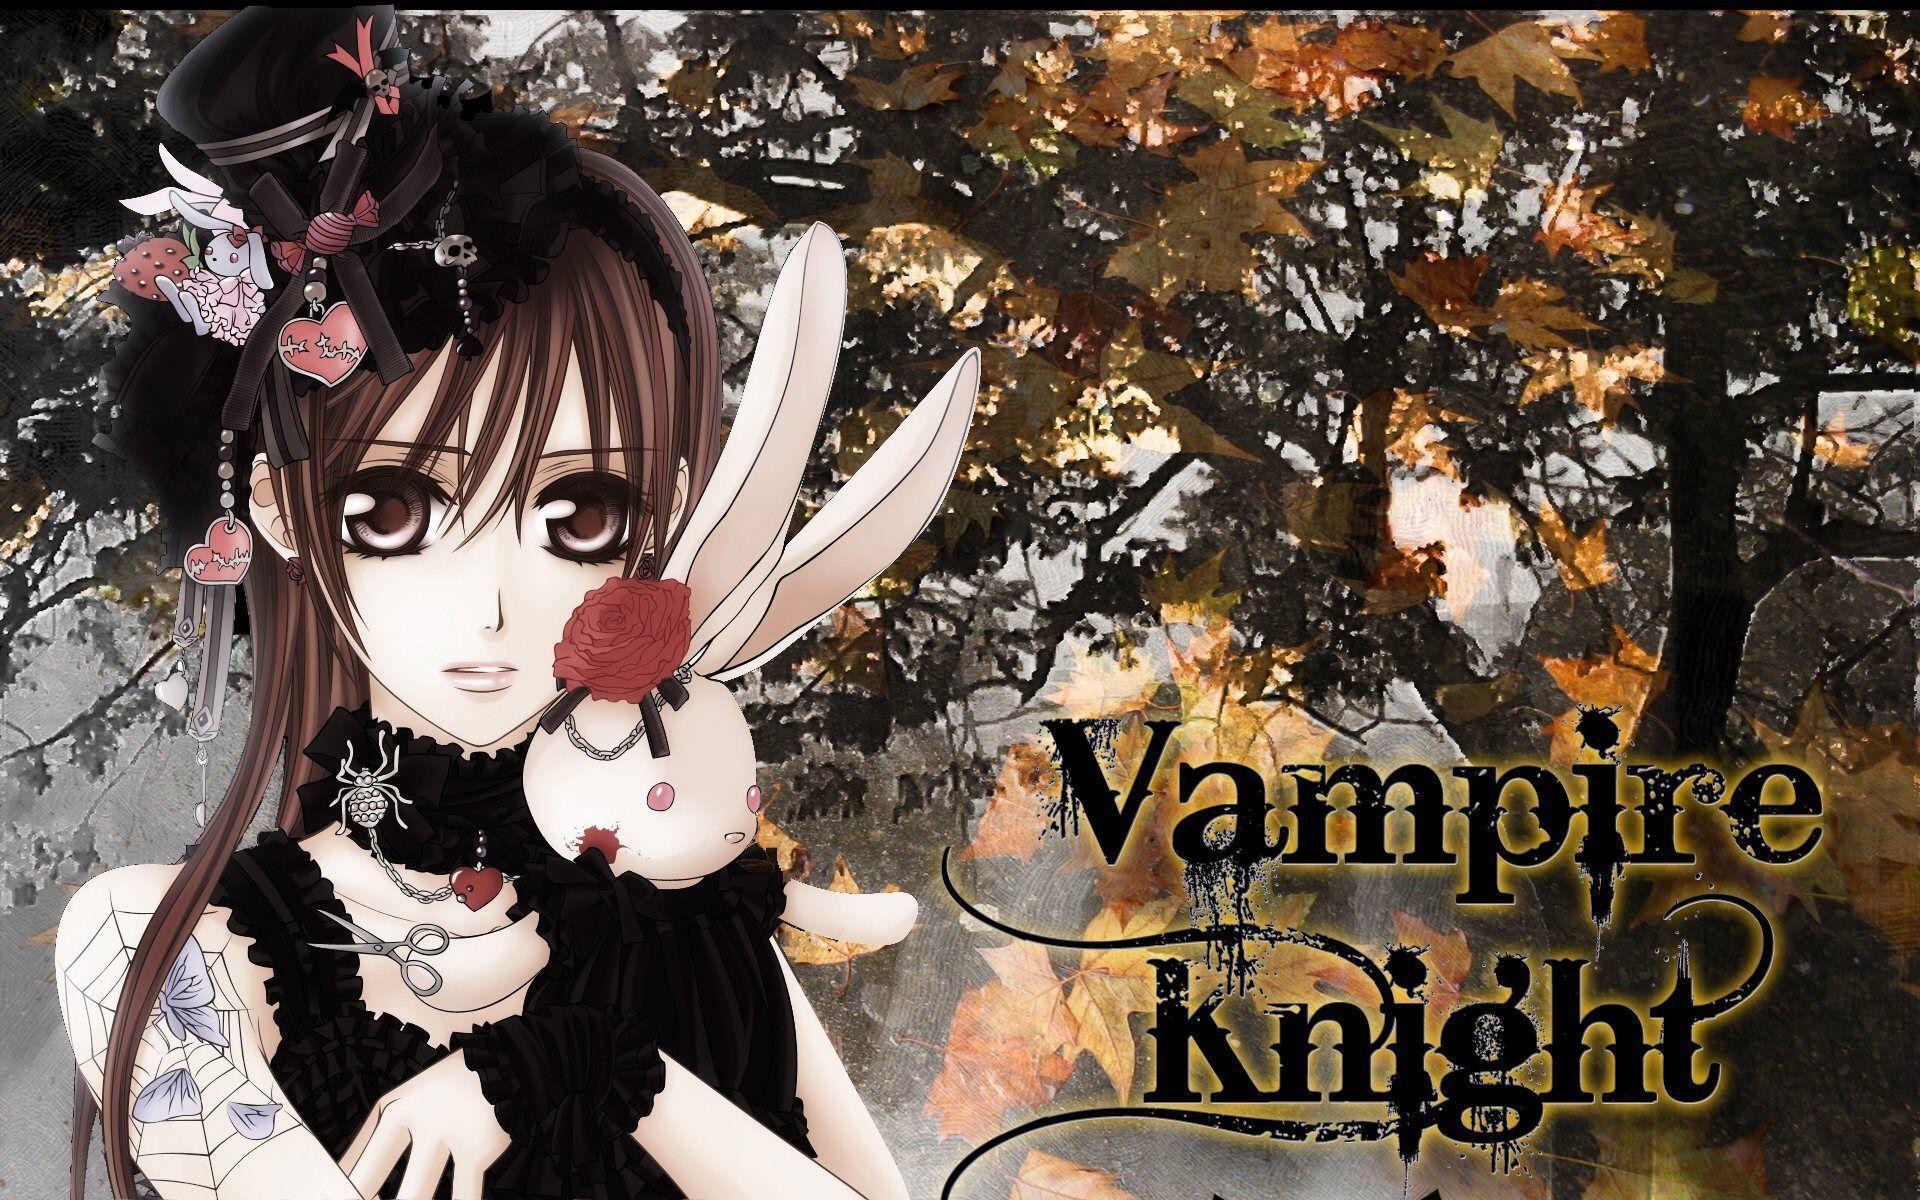 1920x1200 Vampire Knight Wallpaper | Vampire Knight Anime Pictures | Cool .